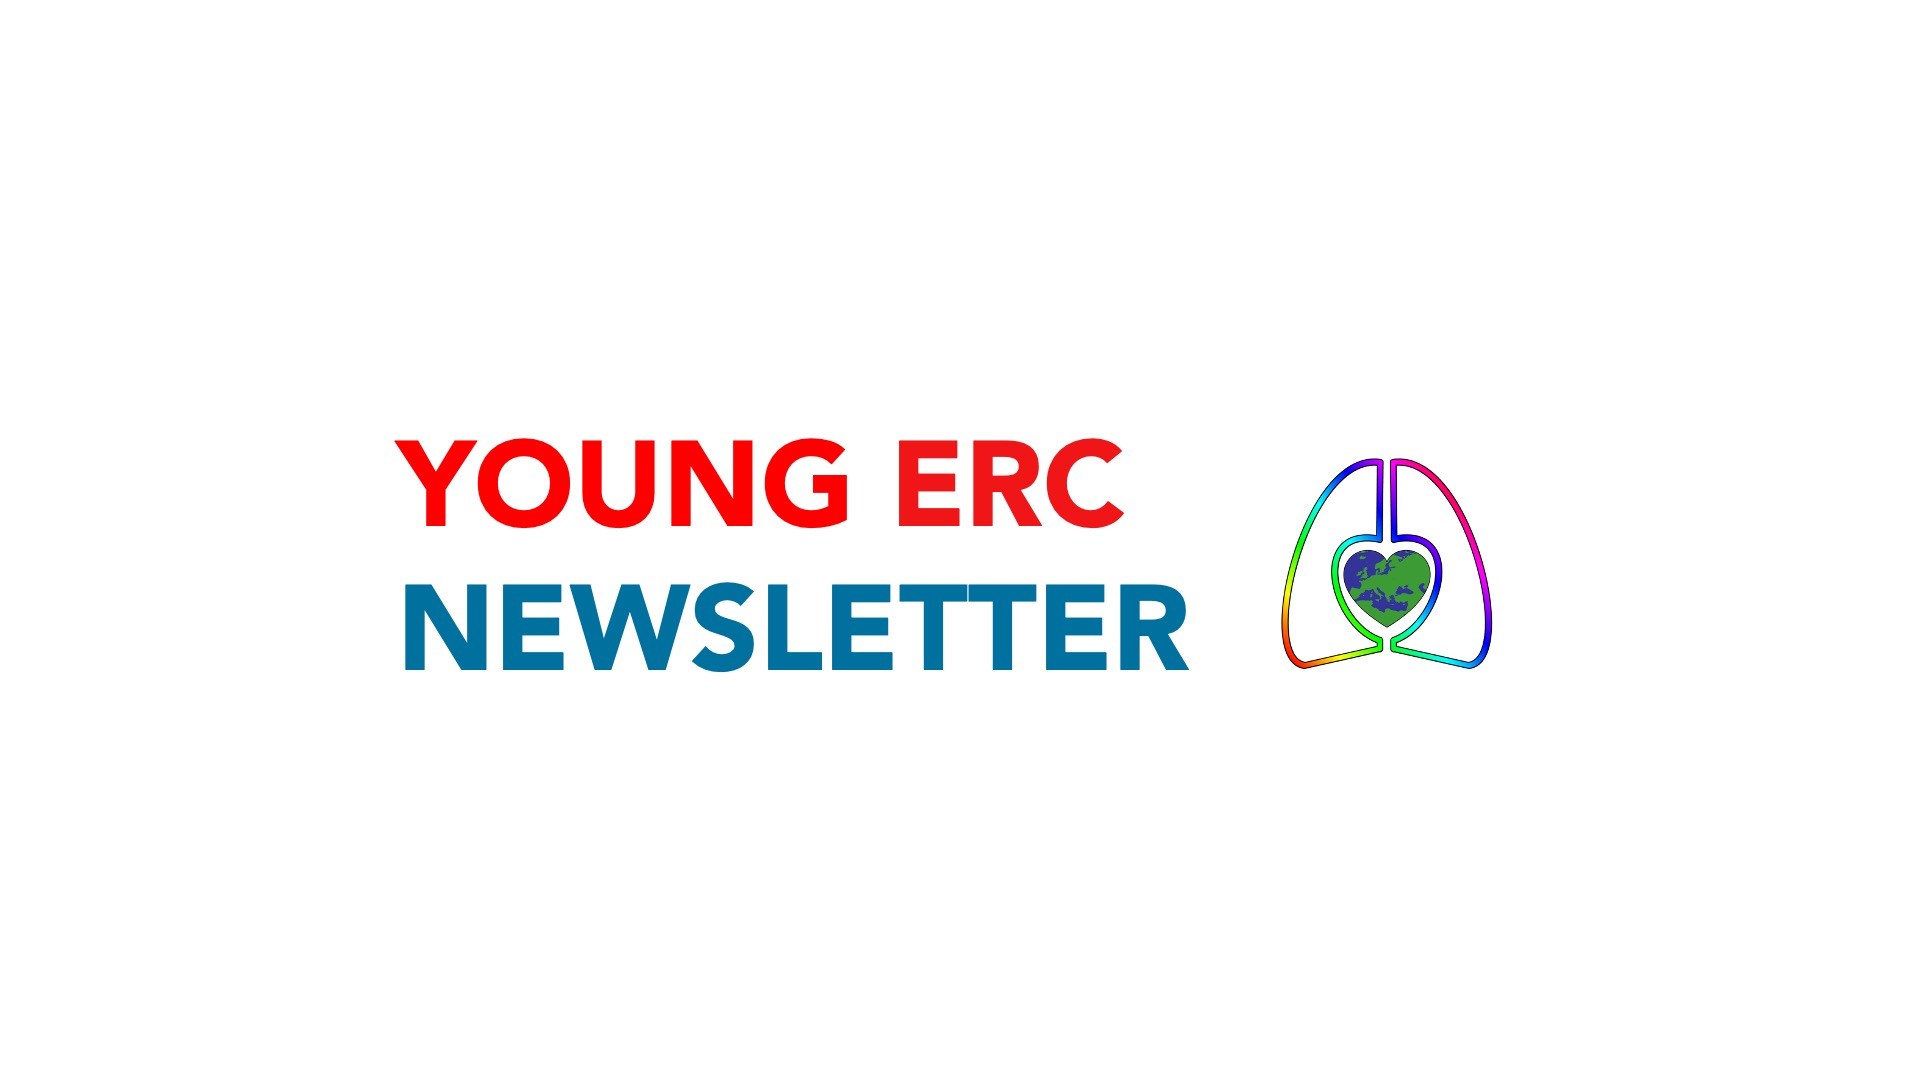 Young ERC Newsletters